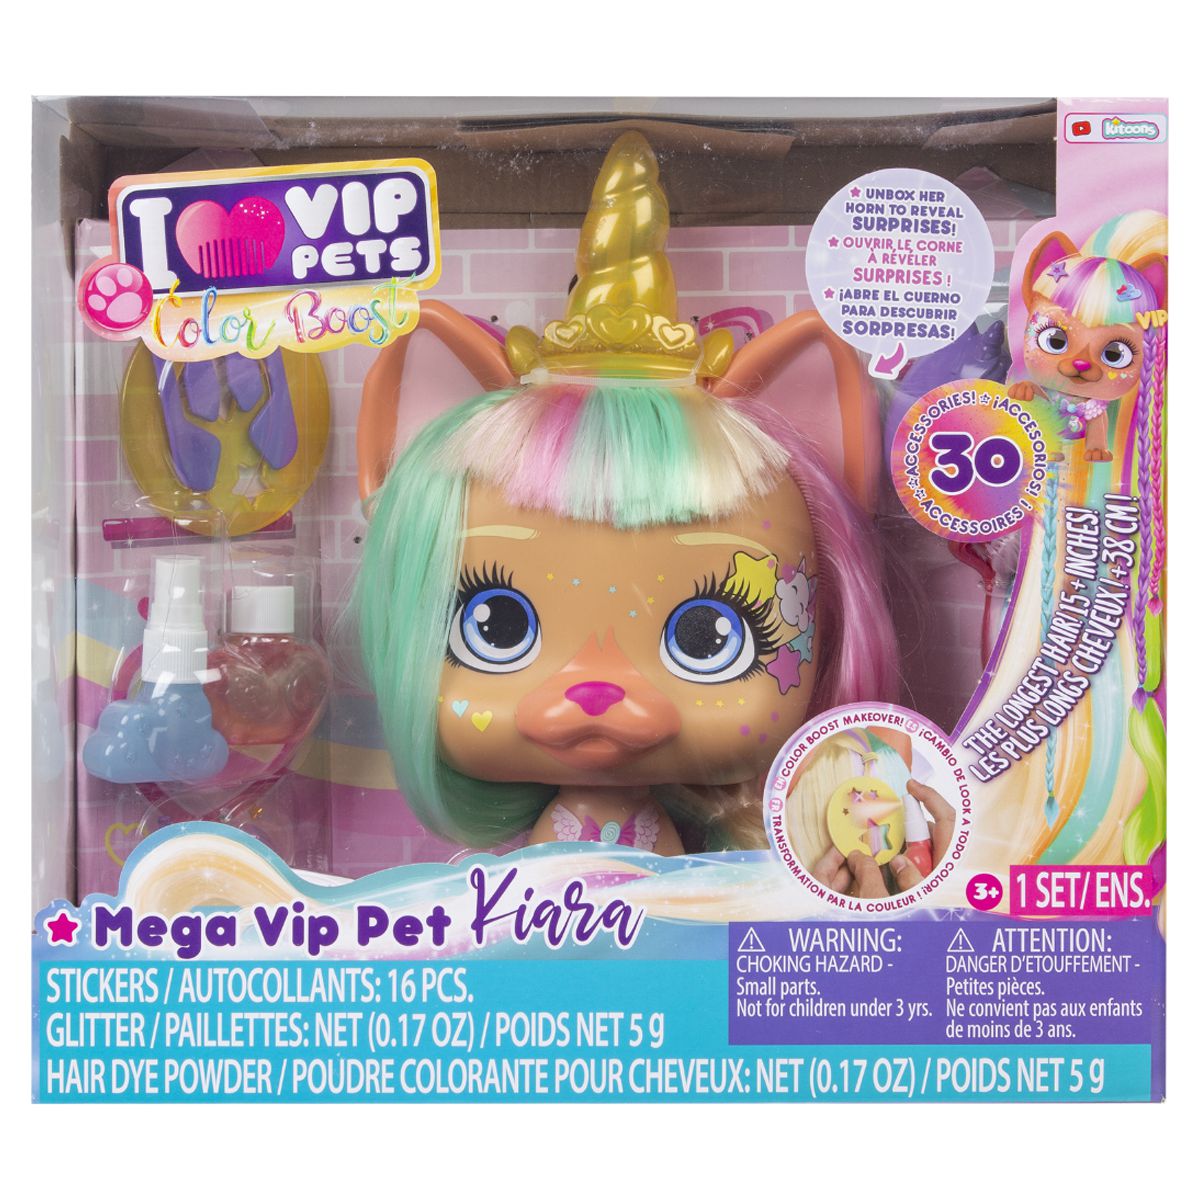 VIP Pets Color Boost Mega Pet Kiara - Exclusive Styling Head and 30 Accessories - image 2 of 16